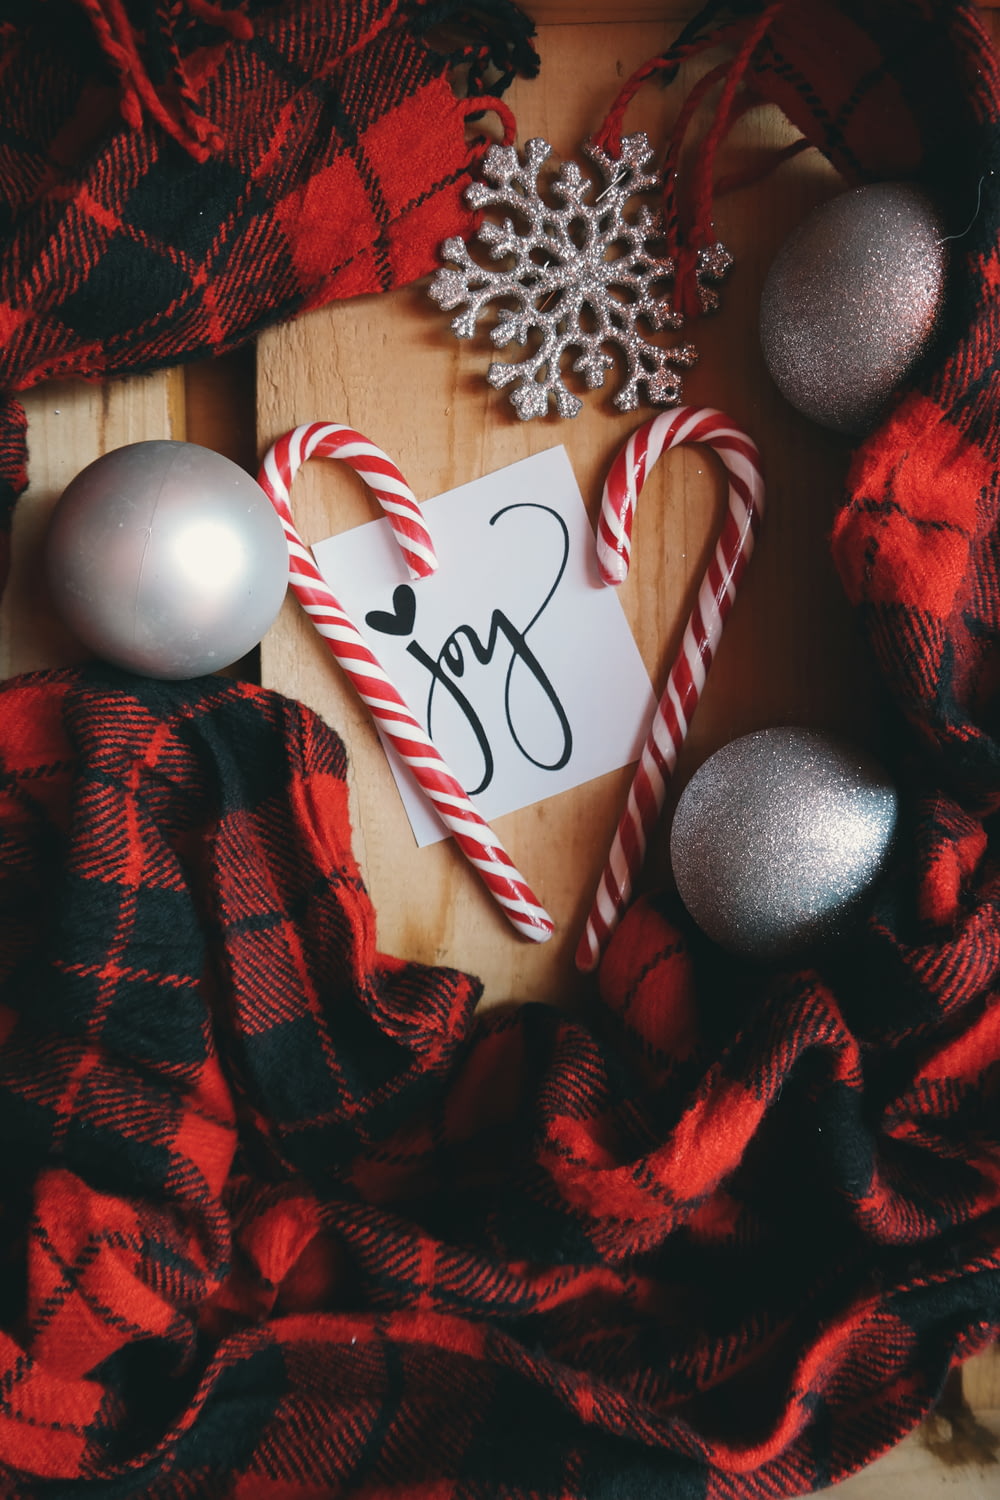 A white note that says "Joy," surrounded by candy canes, XMAS ornaments and red plaid material.